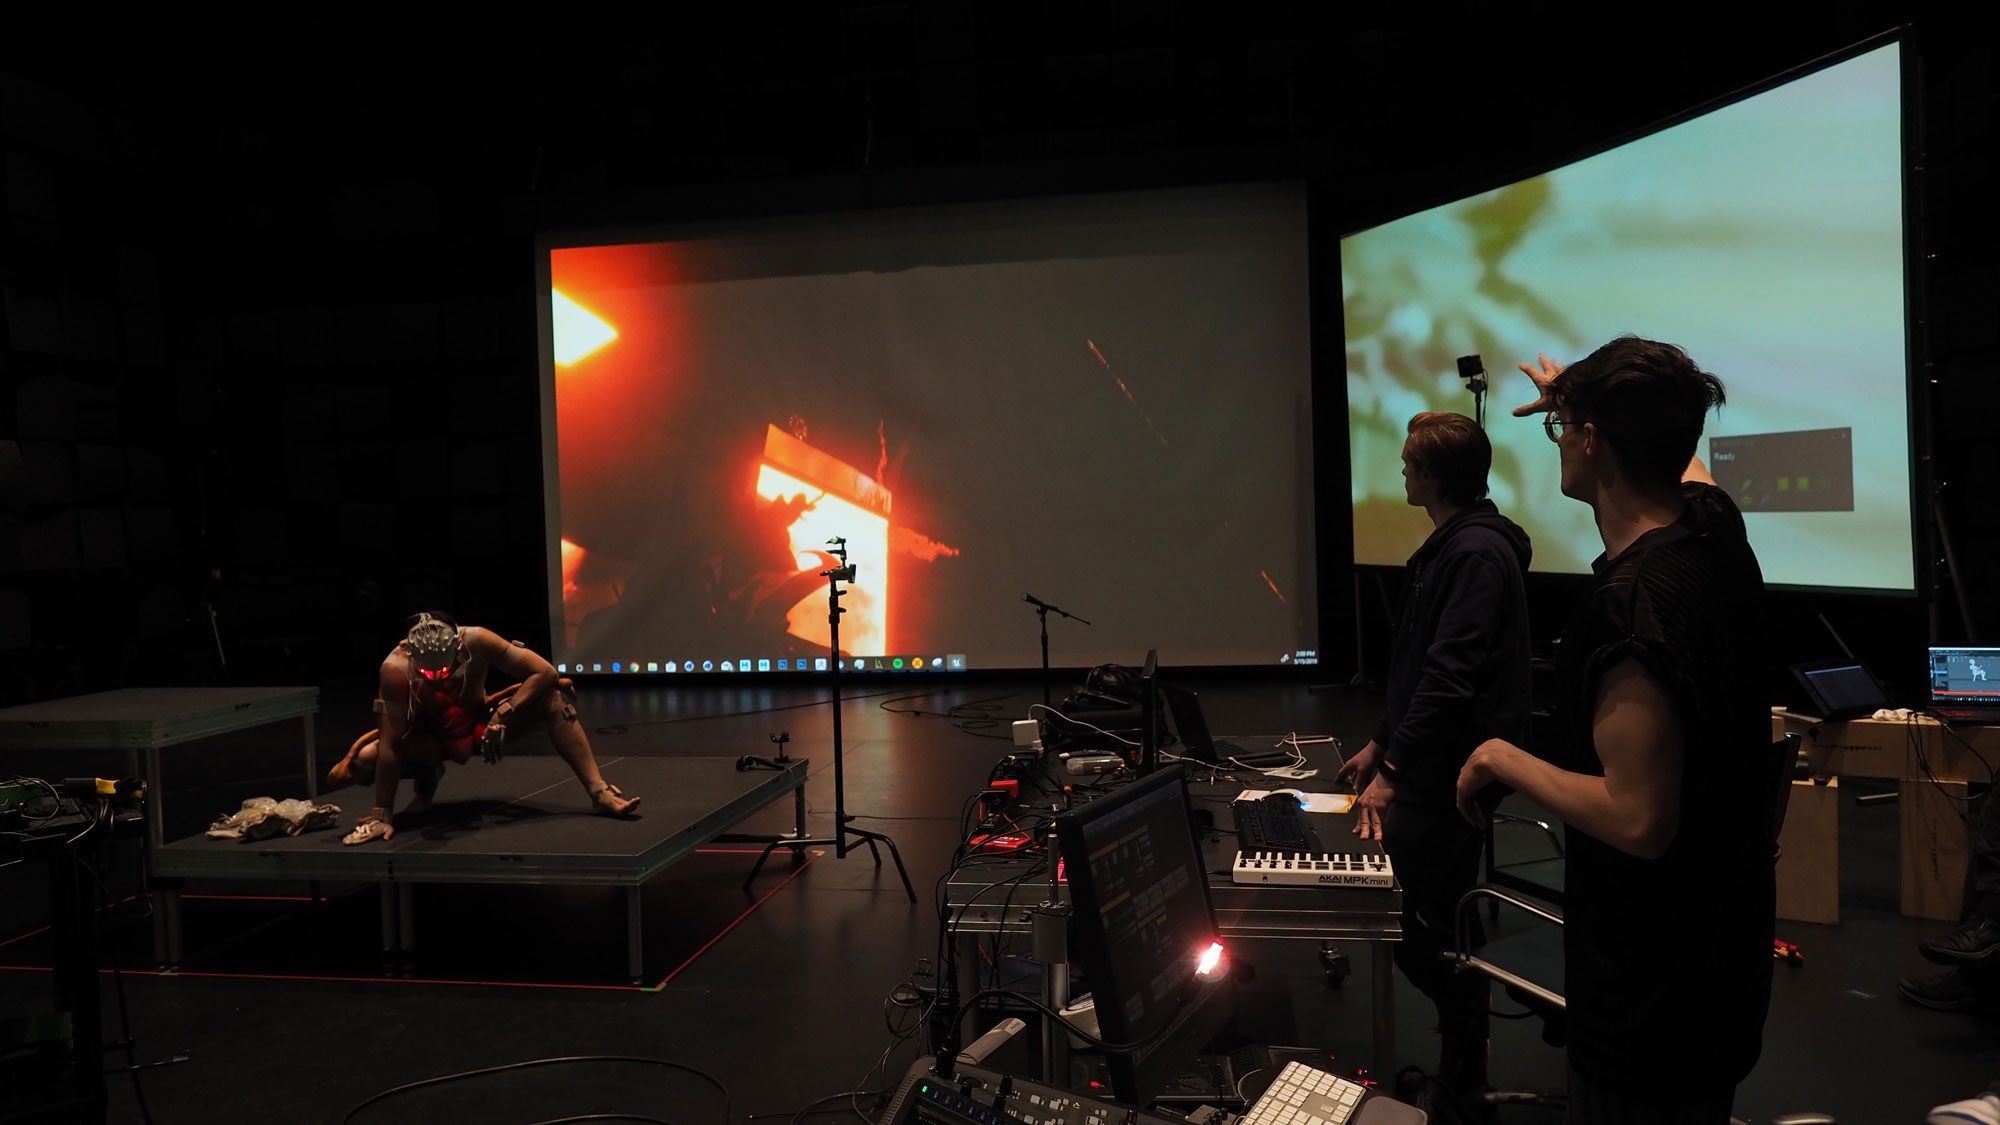 A performer in a squatting position on a black platform wearing a mask of sensors in front of two large screens projecting red and blue abstract scenes. Two people look on, one directing the scene with arm outstretched toward the screens. 